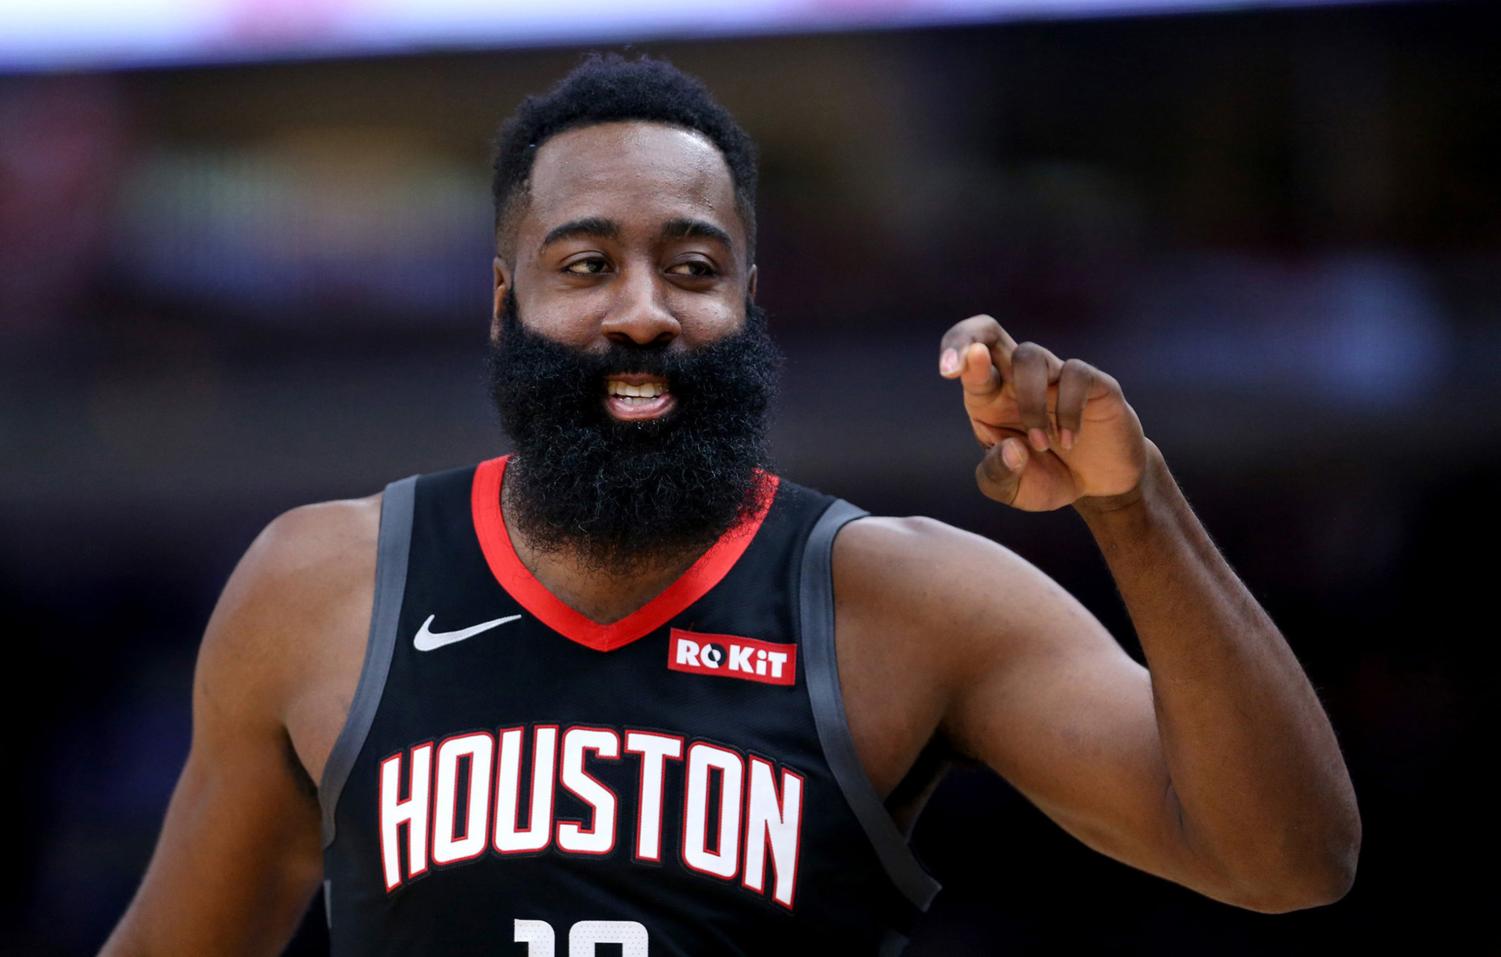 NBA All-Star Game: Q&A with James Harden, Houston Rockets